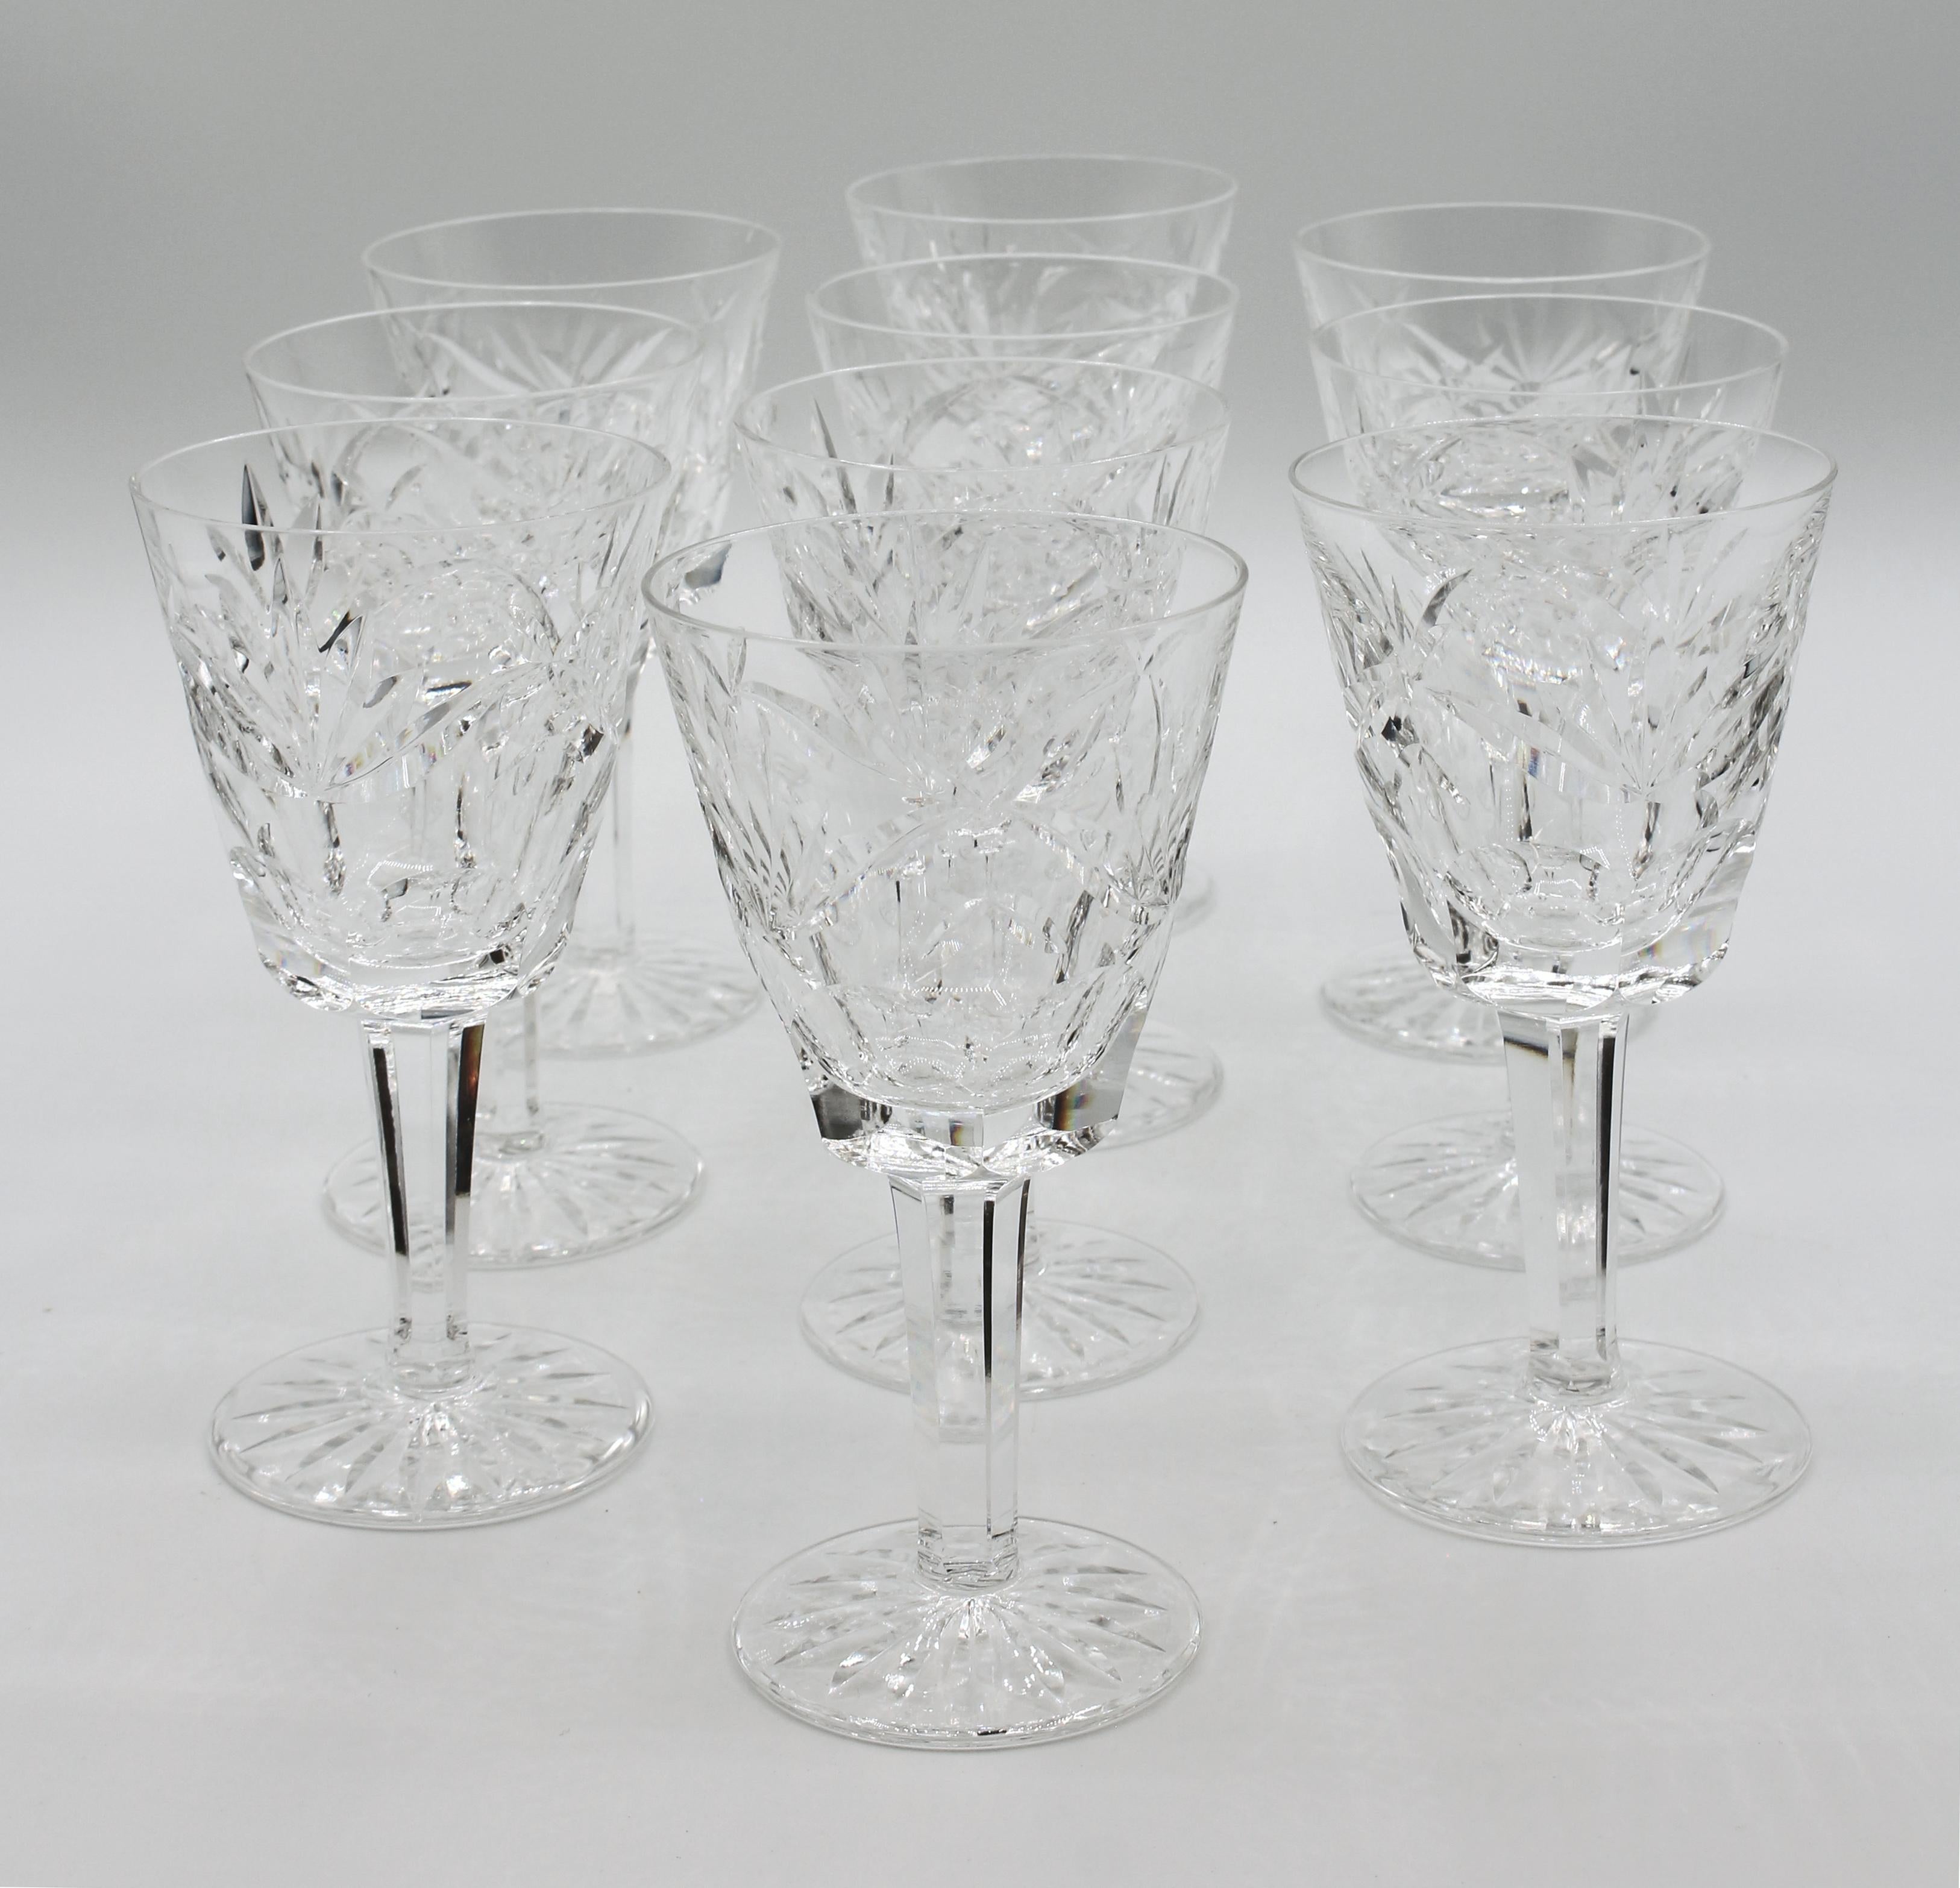 Vintage set of 10 white wine glasses, Ashling by Waterford. Pattern produced 1968-2017. Hand blown & cut. Minor crack on rim of one glass. Measures : 5 7/8